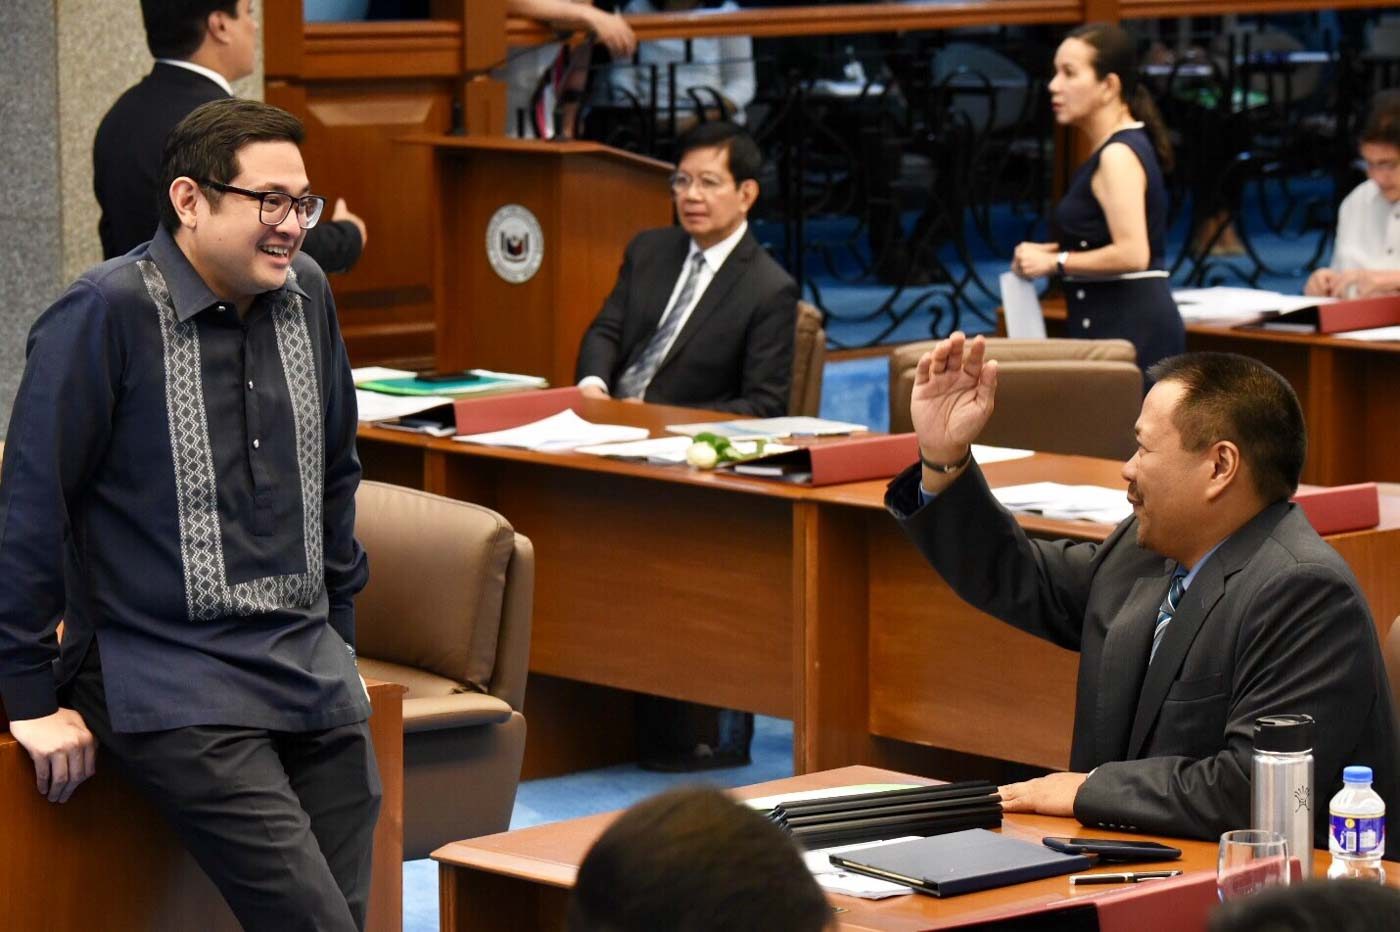 BACK TO WORK. Senators Bam Aquino and JV Ejercito, who both lost their reelection bids during the May 13 polls, chat during the Senate session on May 20, 2019. Photo by Angie de Silva/Rappler  